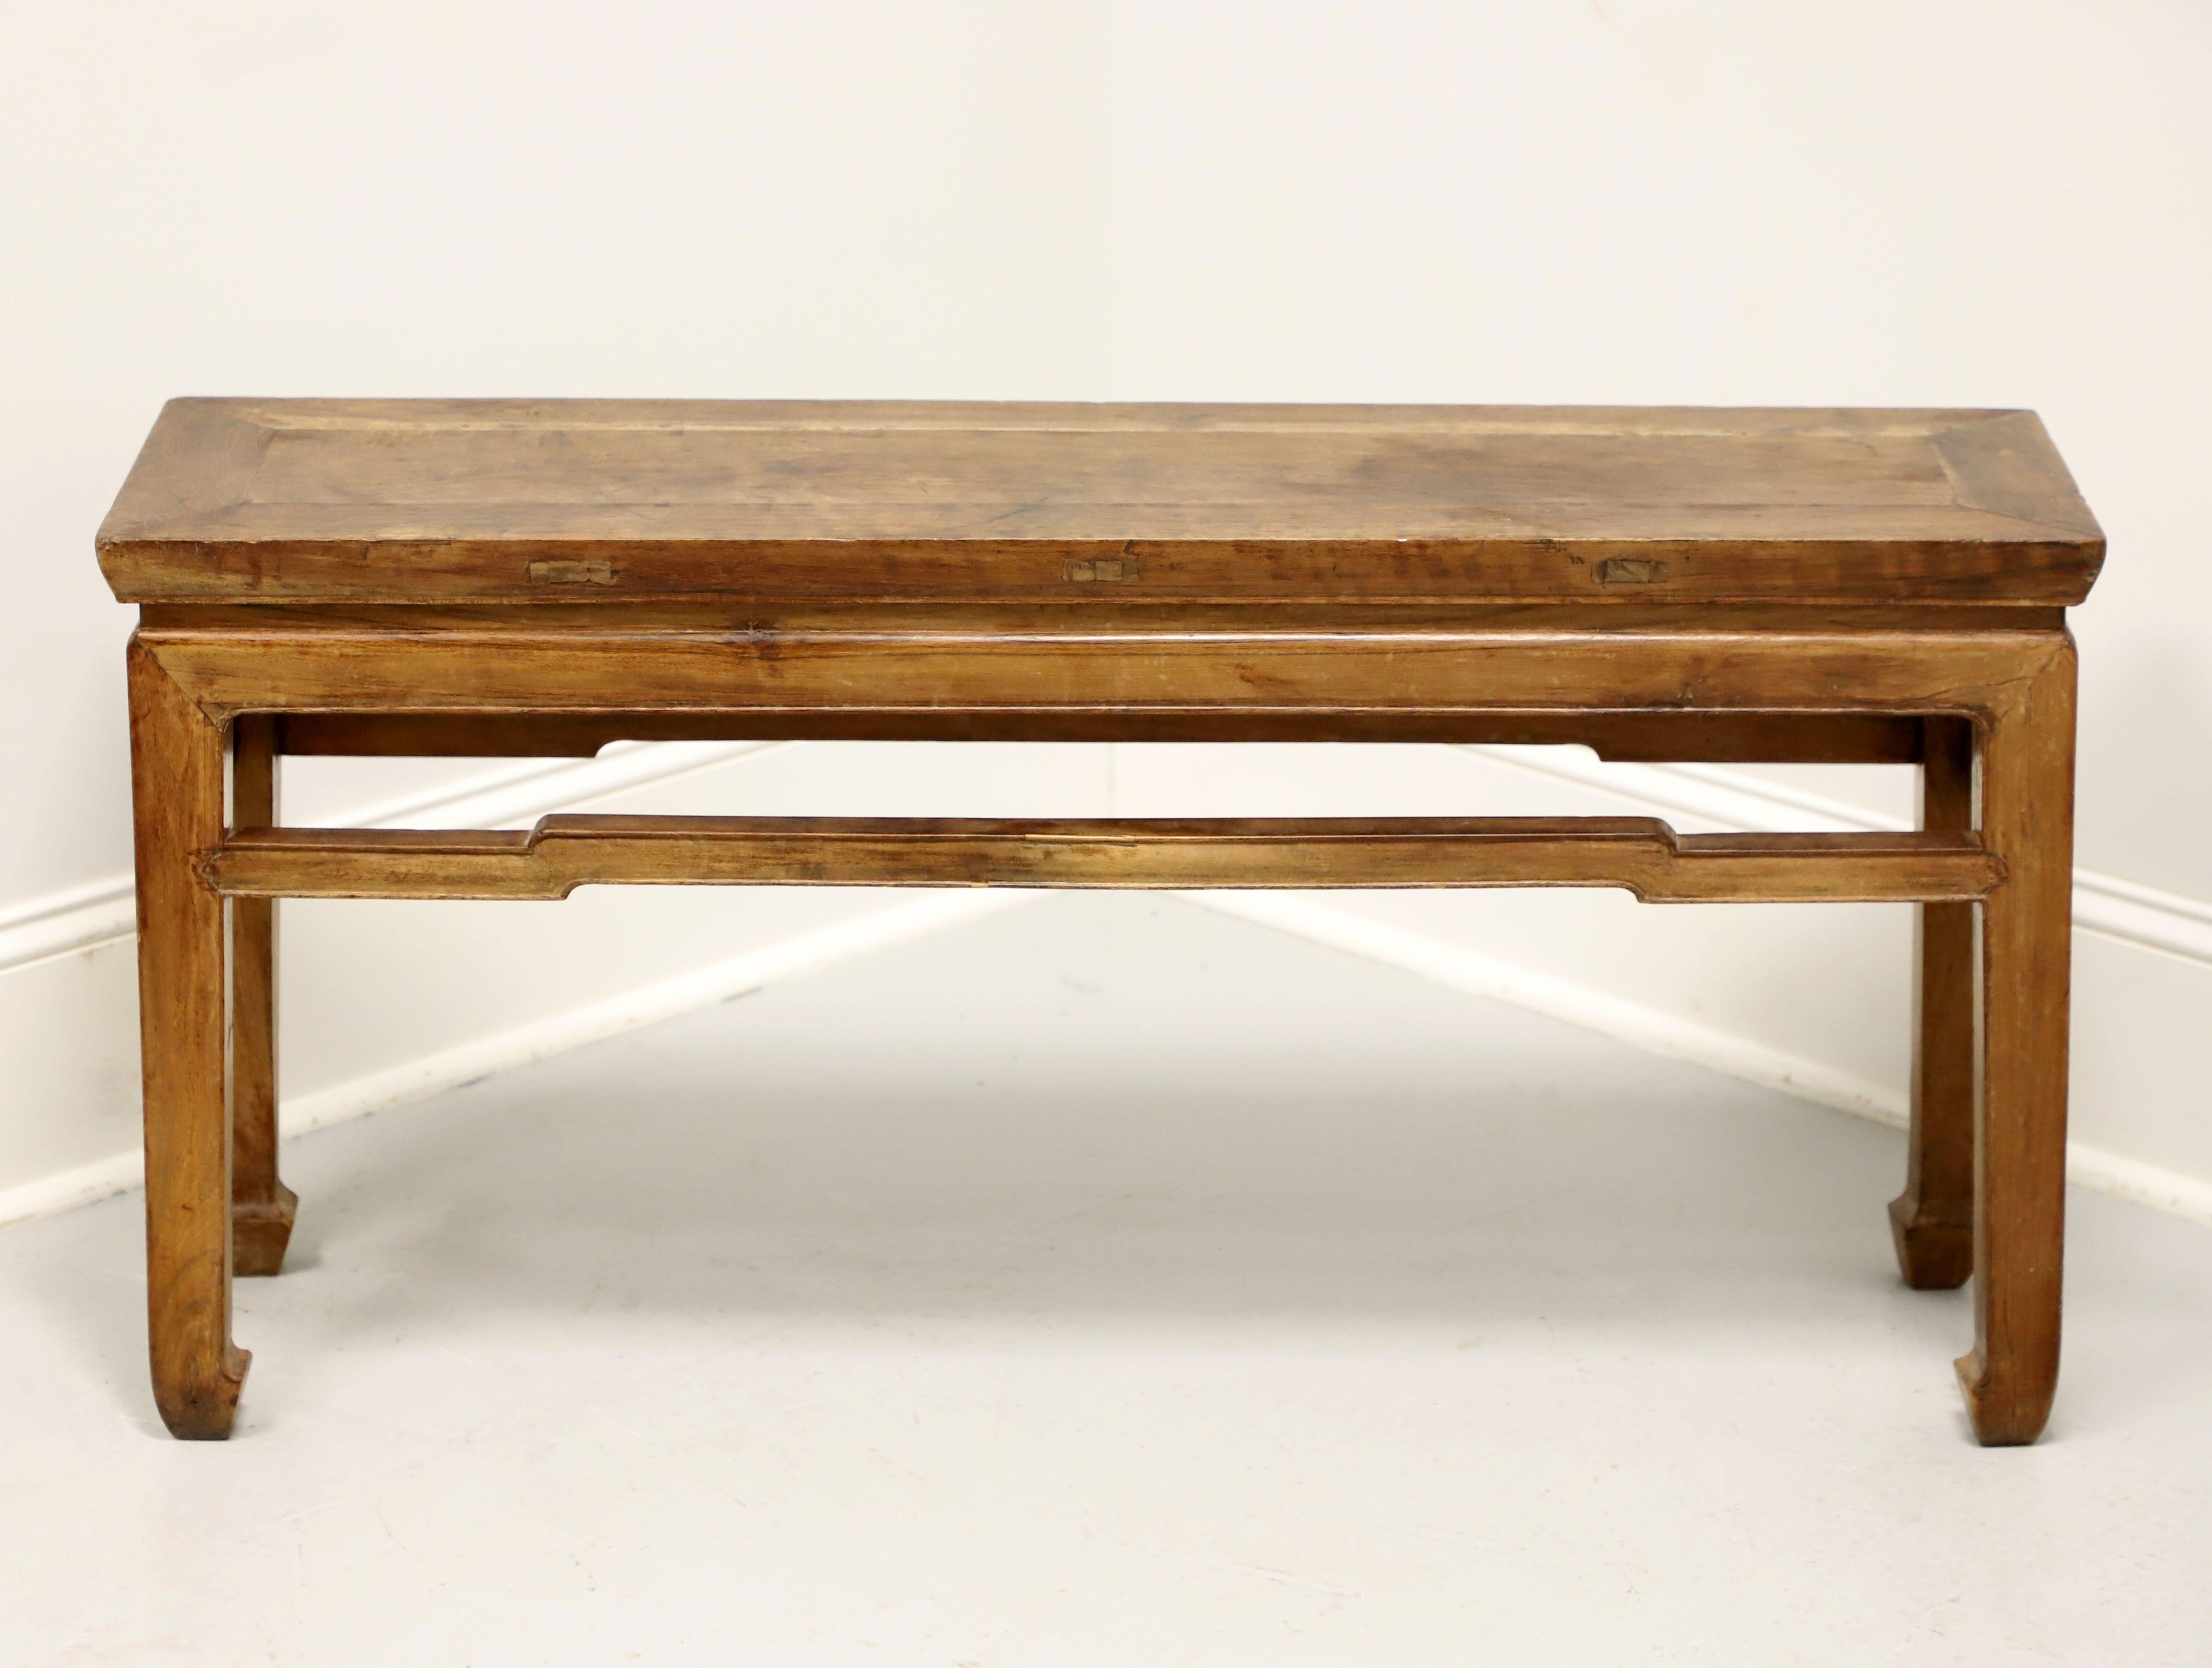 An antique Asian Ming style bench, unbranded. Solid Chinese elm, banded seat, carved stretchers, slightly tapered square legs, and turned inward spade feet. Likely made in Asia, in the late 19th Century.

Measures:  Overall: 41.25w 11.75d 20.25h,